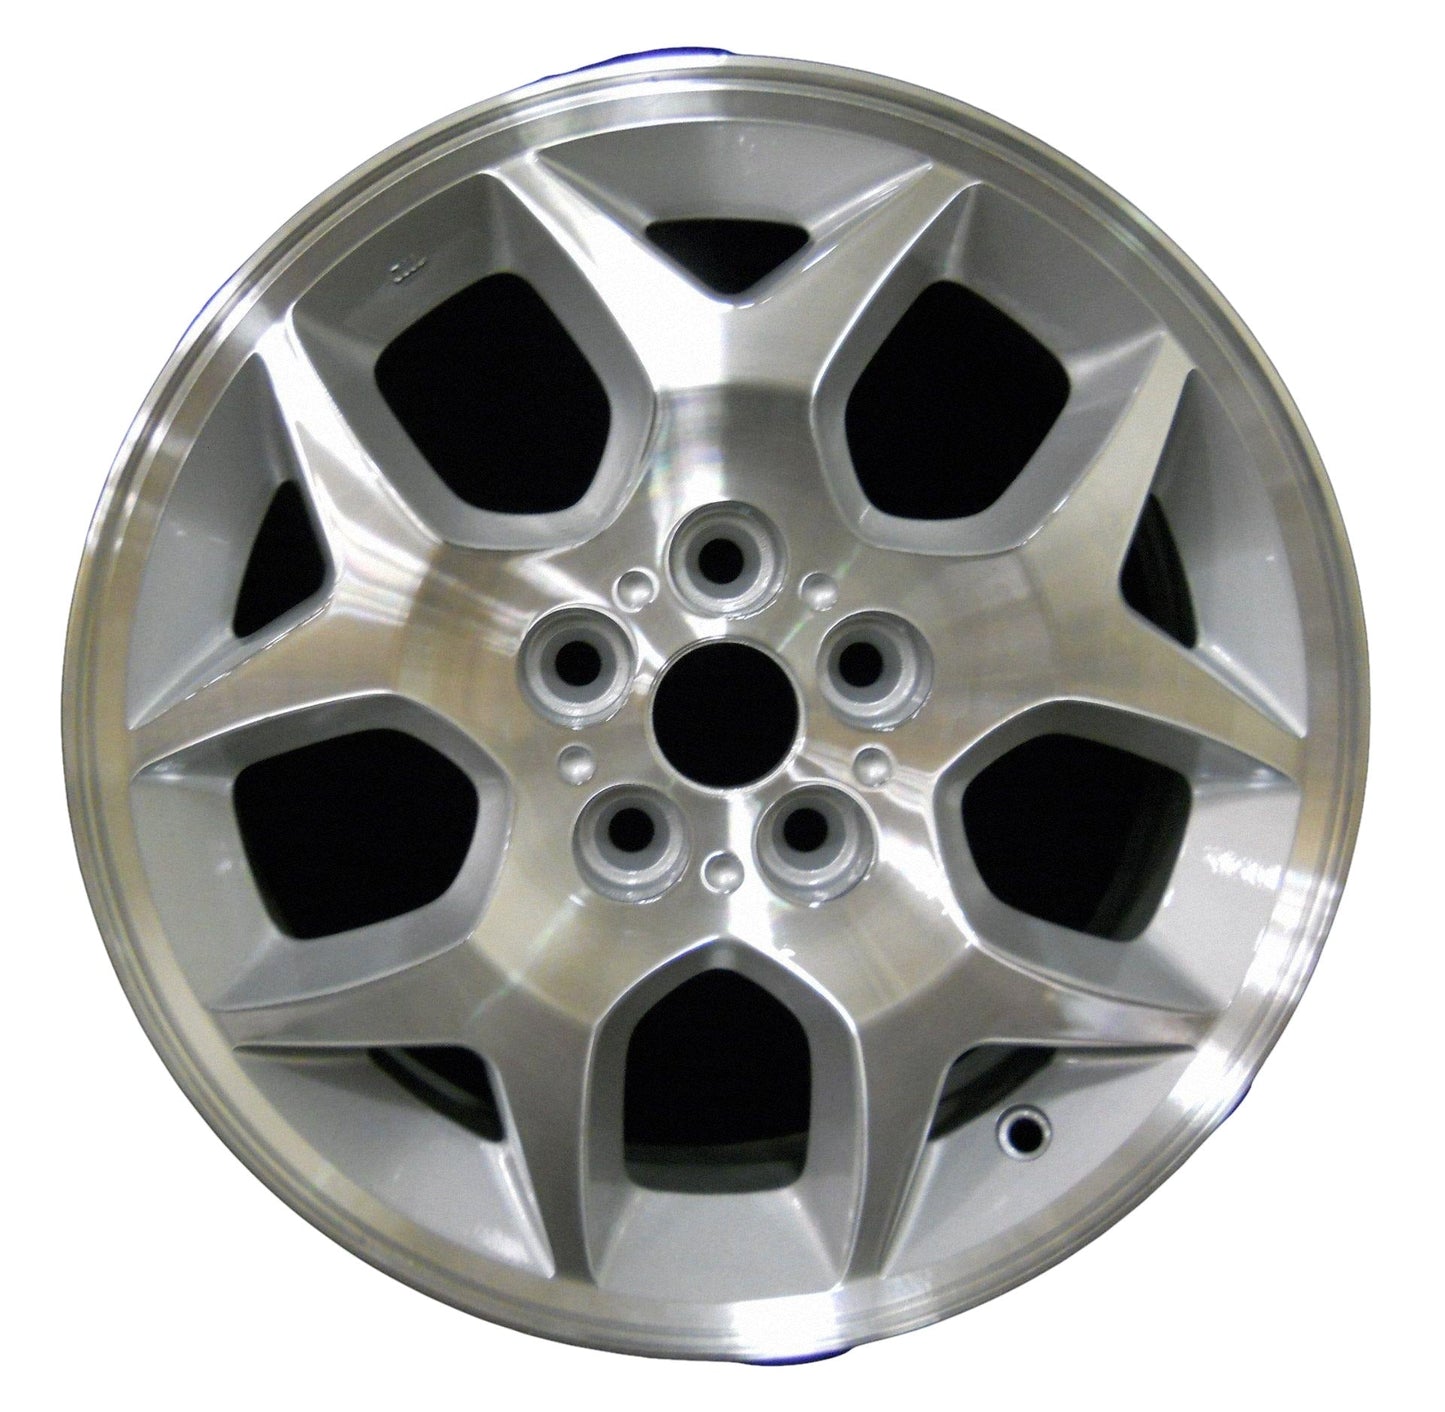 Plymouth Neon  2000, 2001, 2002, 2003, 2004, 2005 Factory OEM Car Wheel Size 15x6 Alloy WAO.2129.PS01.MA